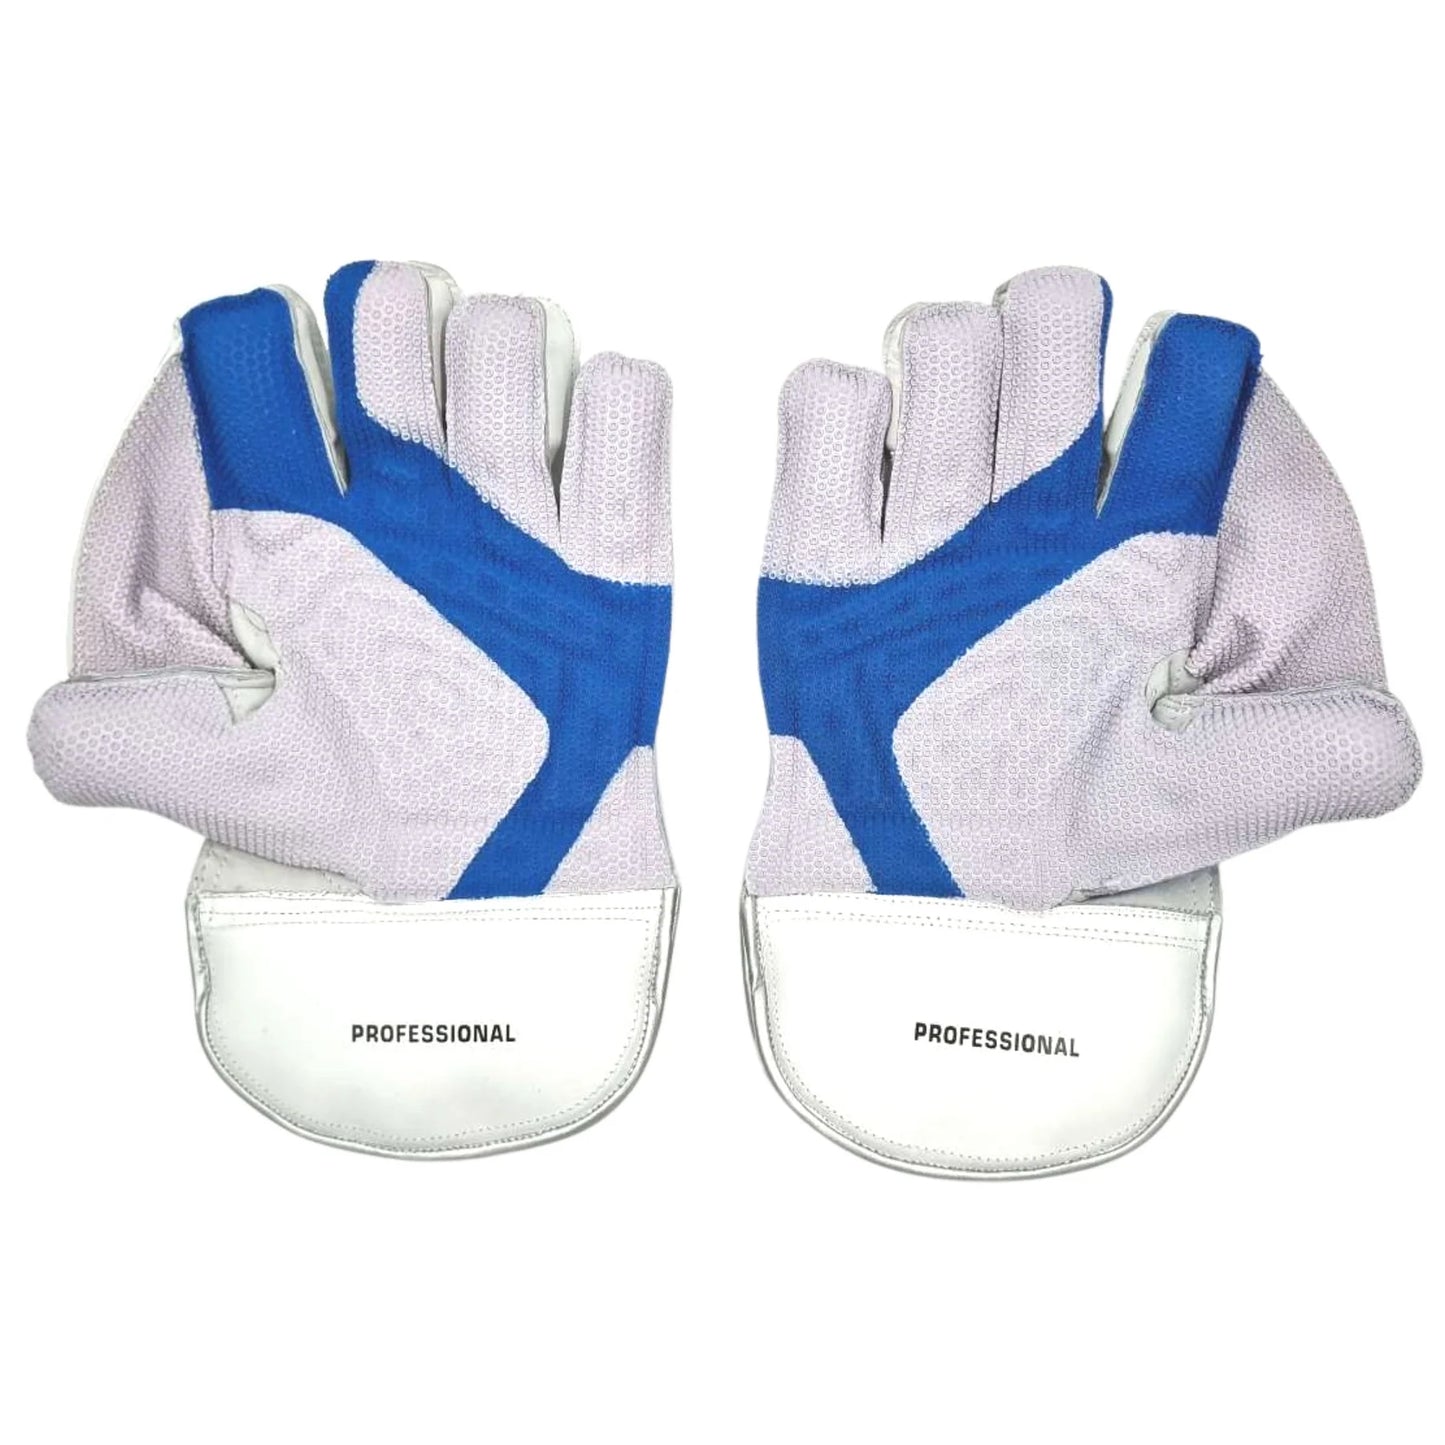 SS Professional cricket wicket keeping gloves